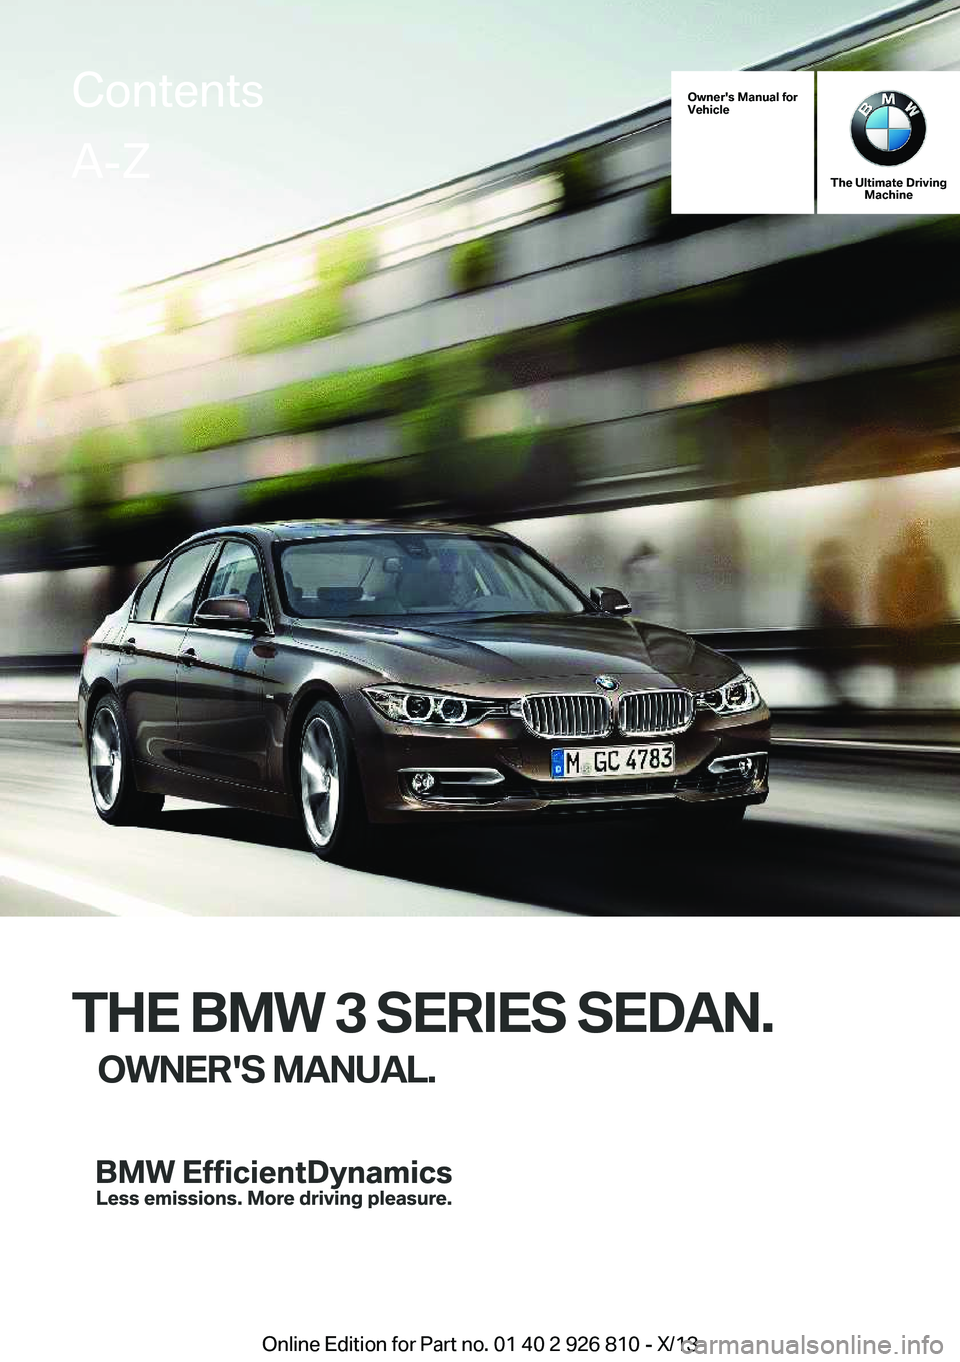 BMW 320i SEDAN 2013  Owners Manual Owner's Manual for
Vehicle
The Ultimate Driving Machine
THE BMW 3 SERIES SEDAN.
OWNER'S MANUAL.
ContentsA-Z
Online Edition for Part no. 01 40 2 926 810 - X/13   